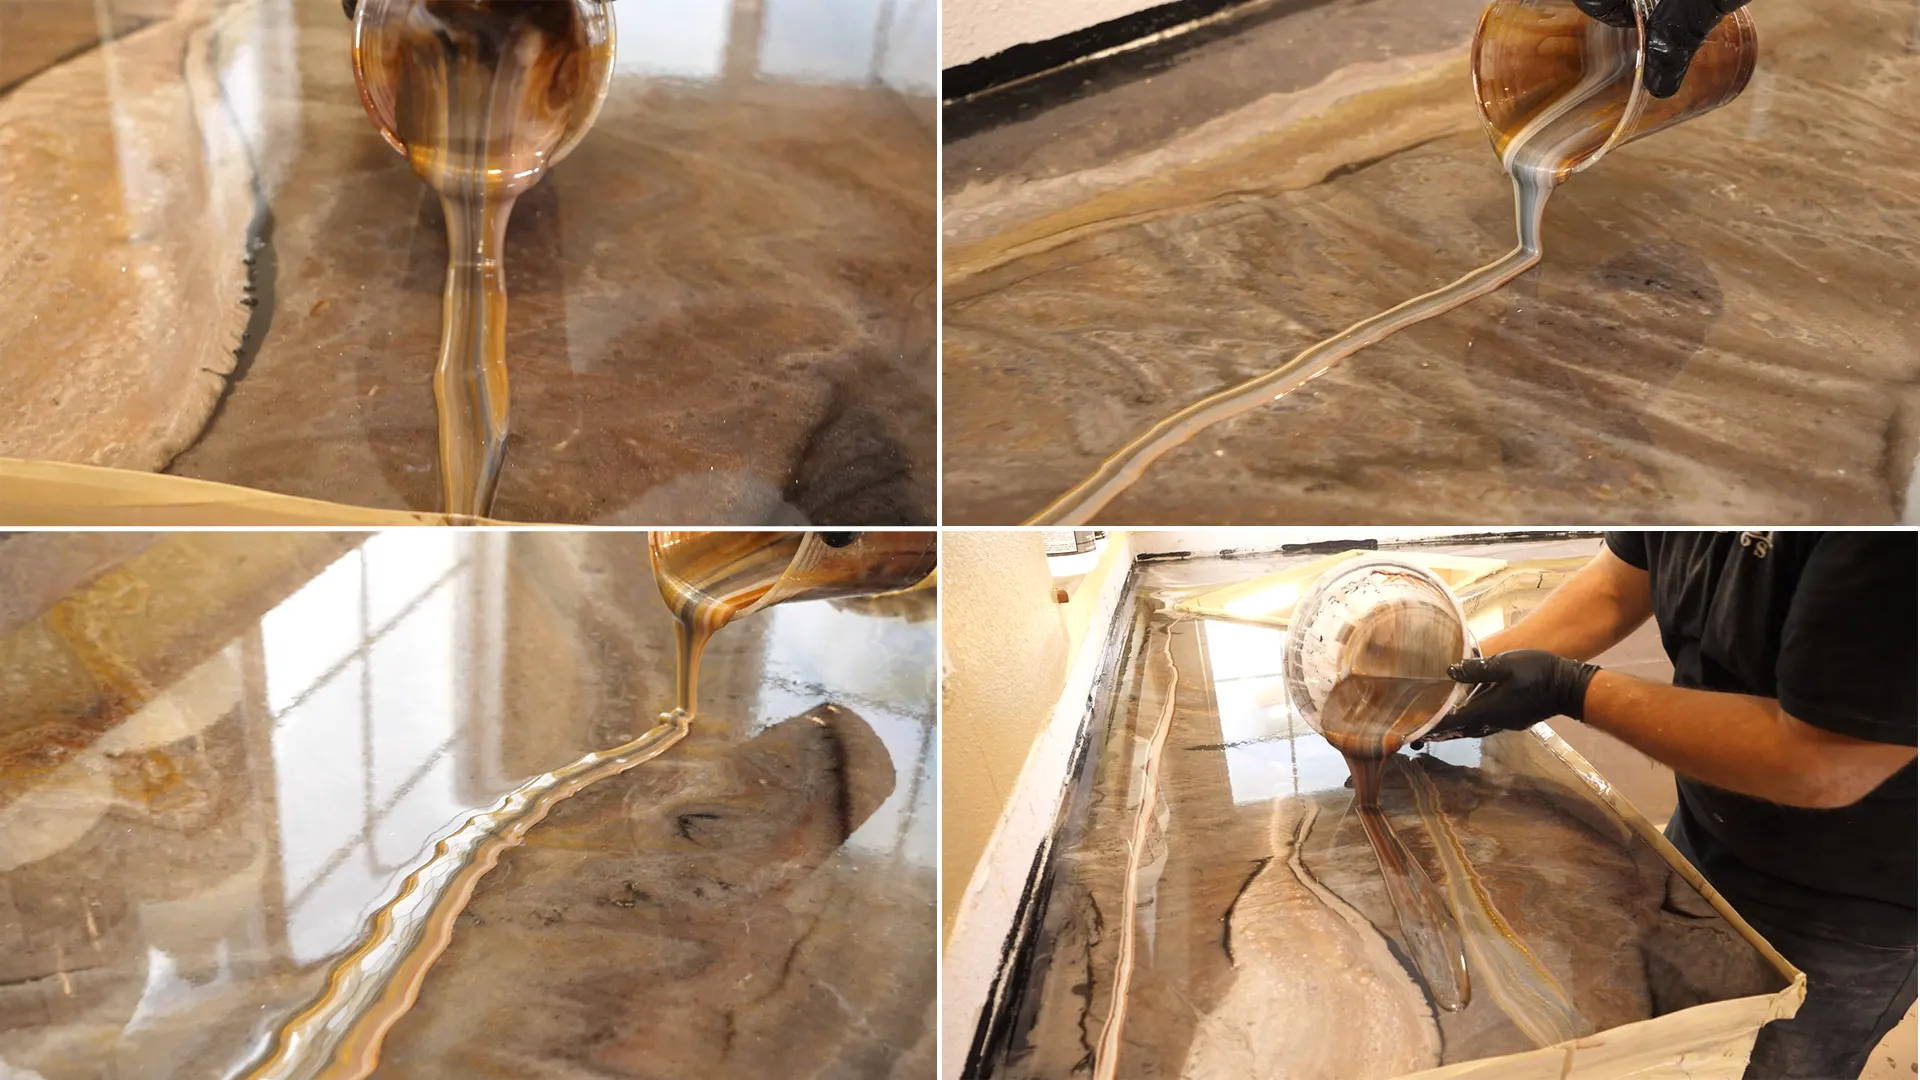 Adding final effects by pouring the remaining epoxy onto countertops for a desired natural look and to mimic sediment.